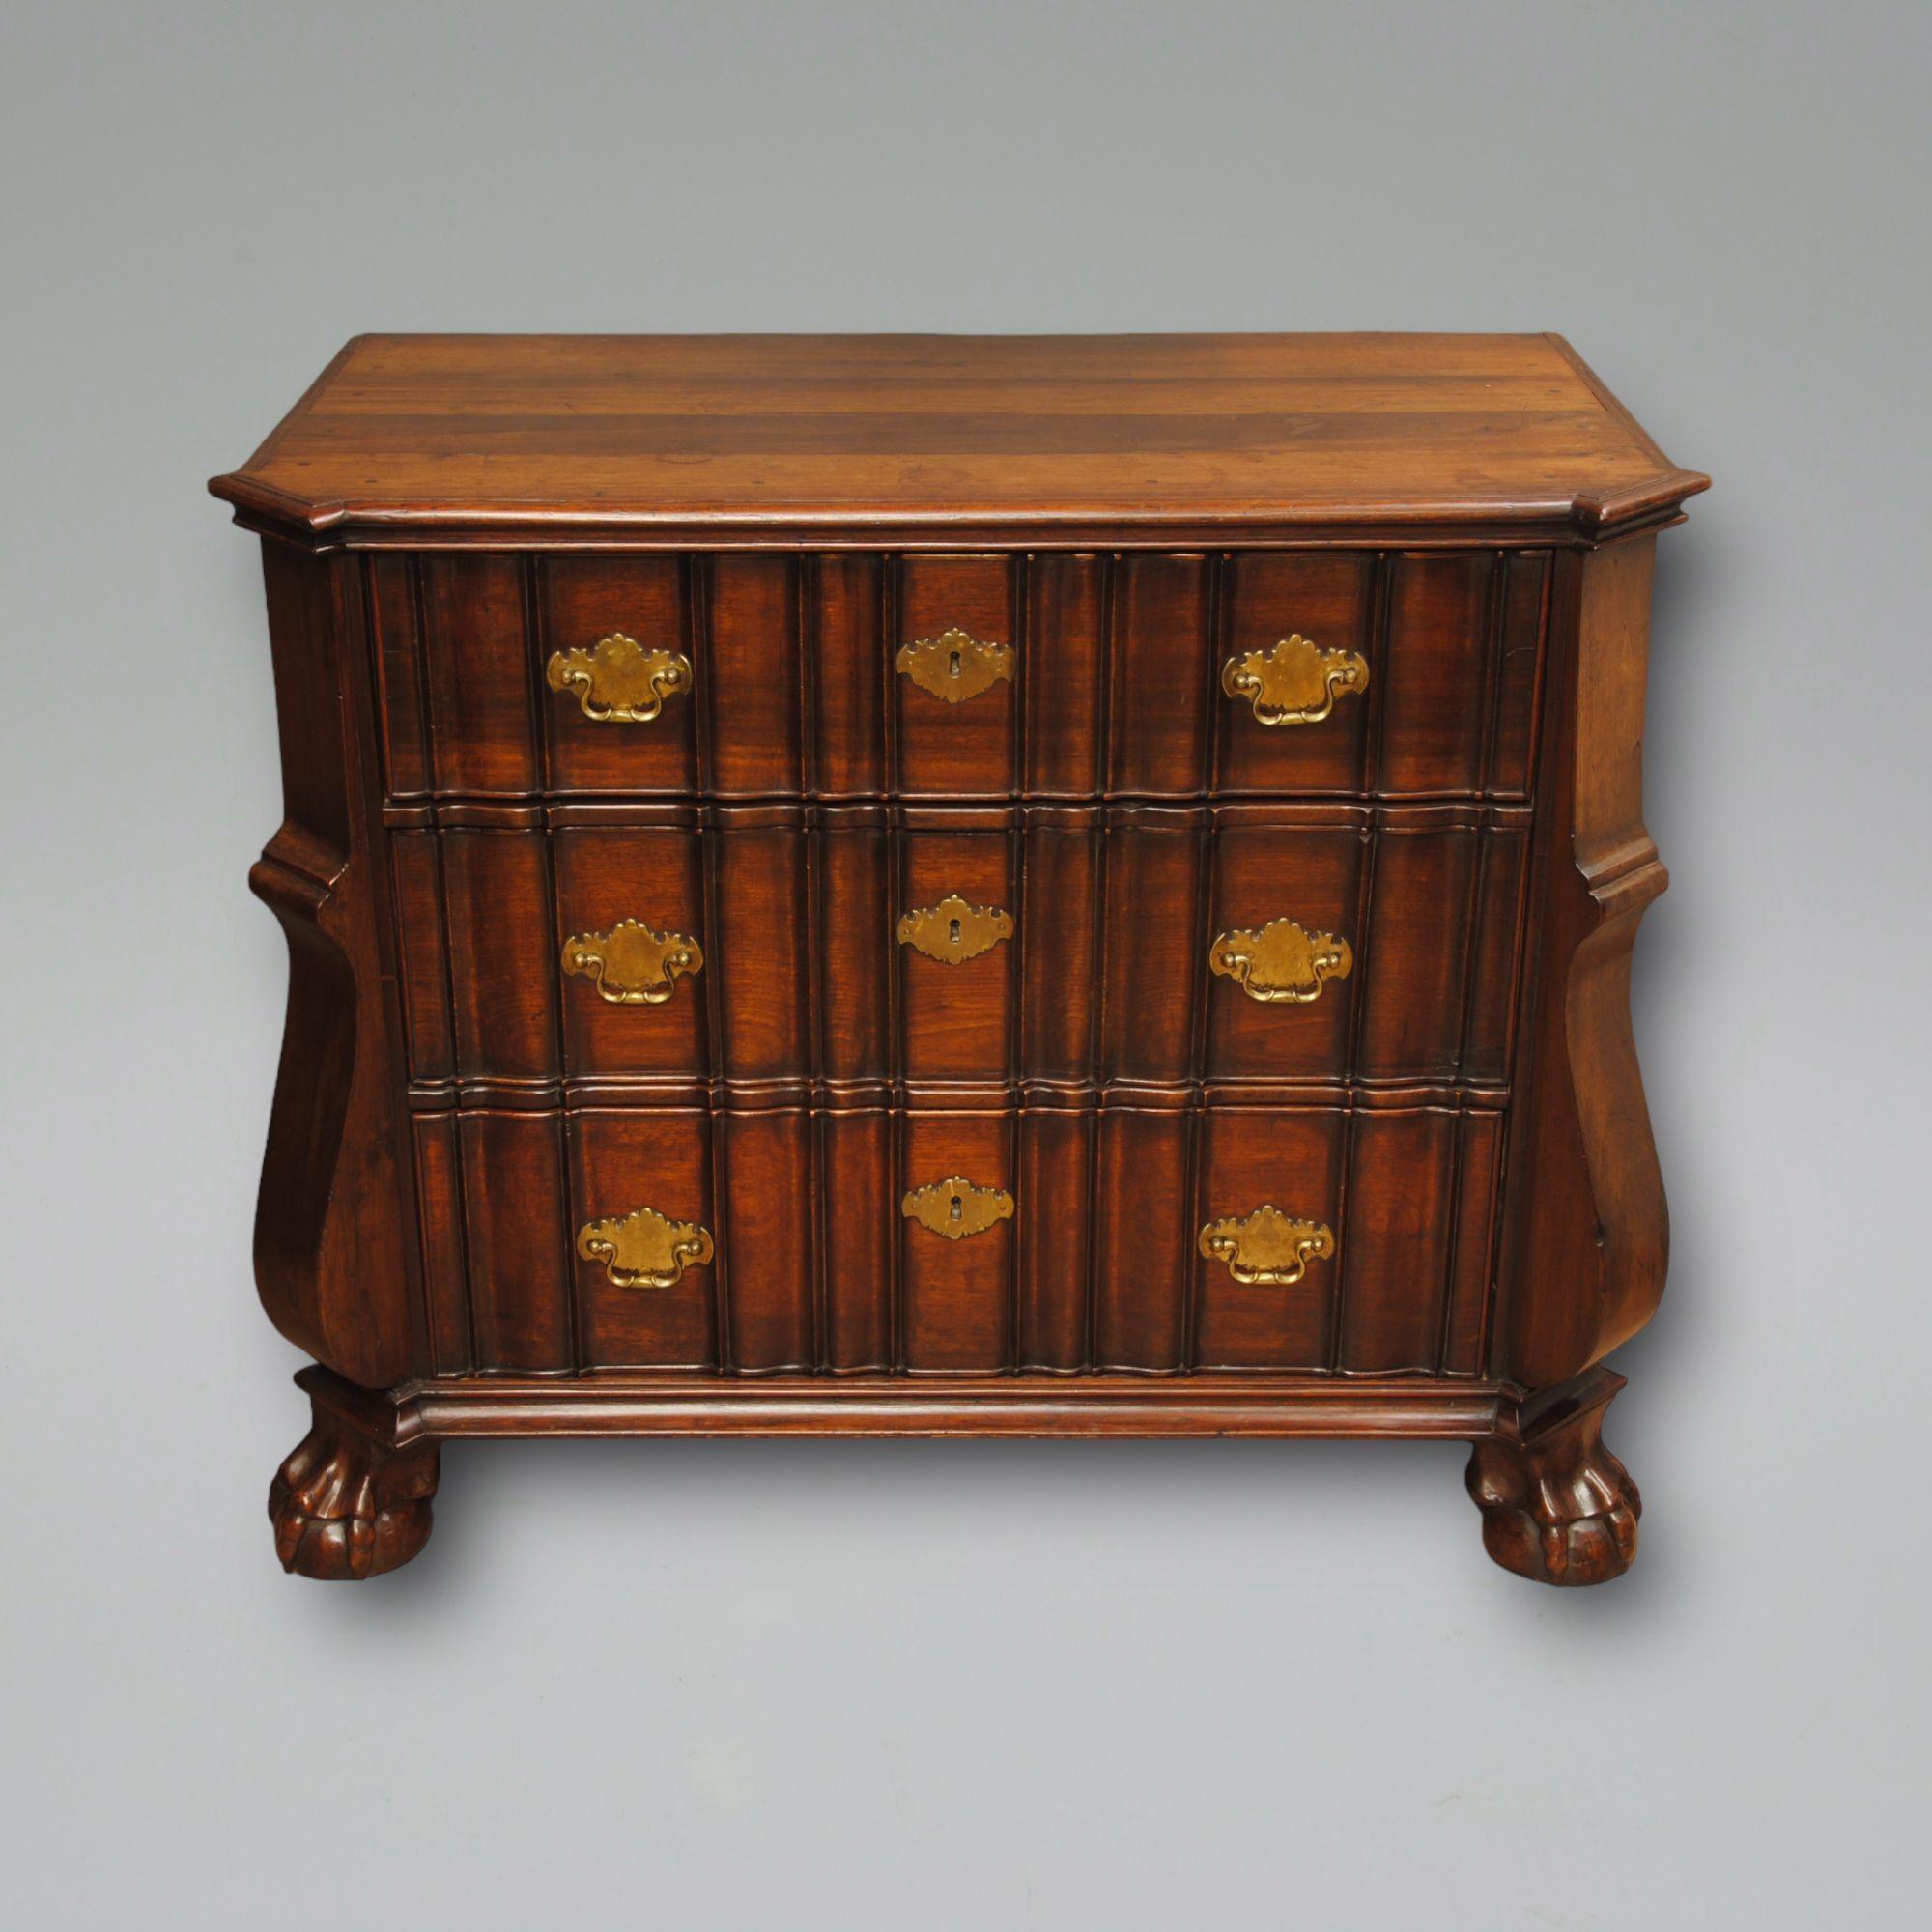 An 18th century Cape block front chest.
This Dutch colonial chest was made in the Cape using local stinkwood it has the original brass handles and carved paw feet.